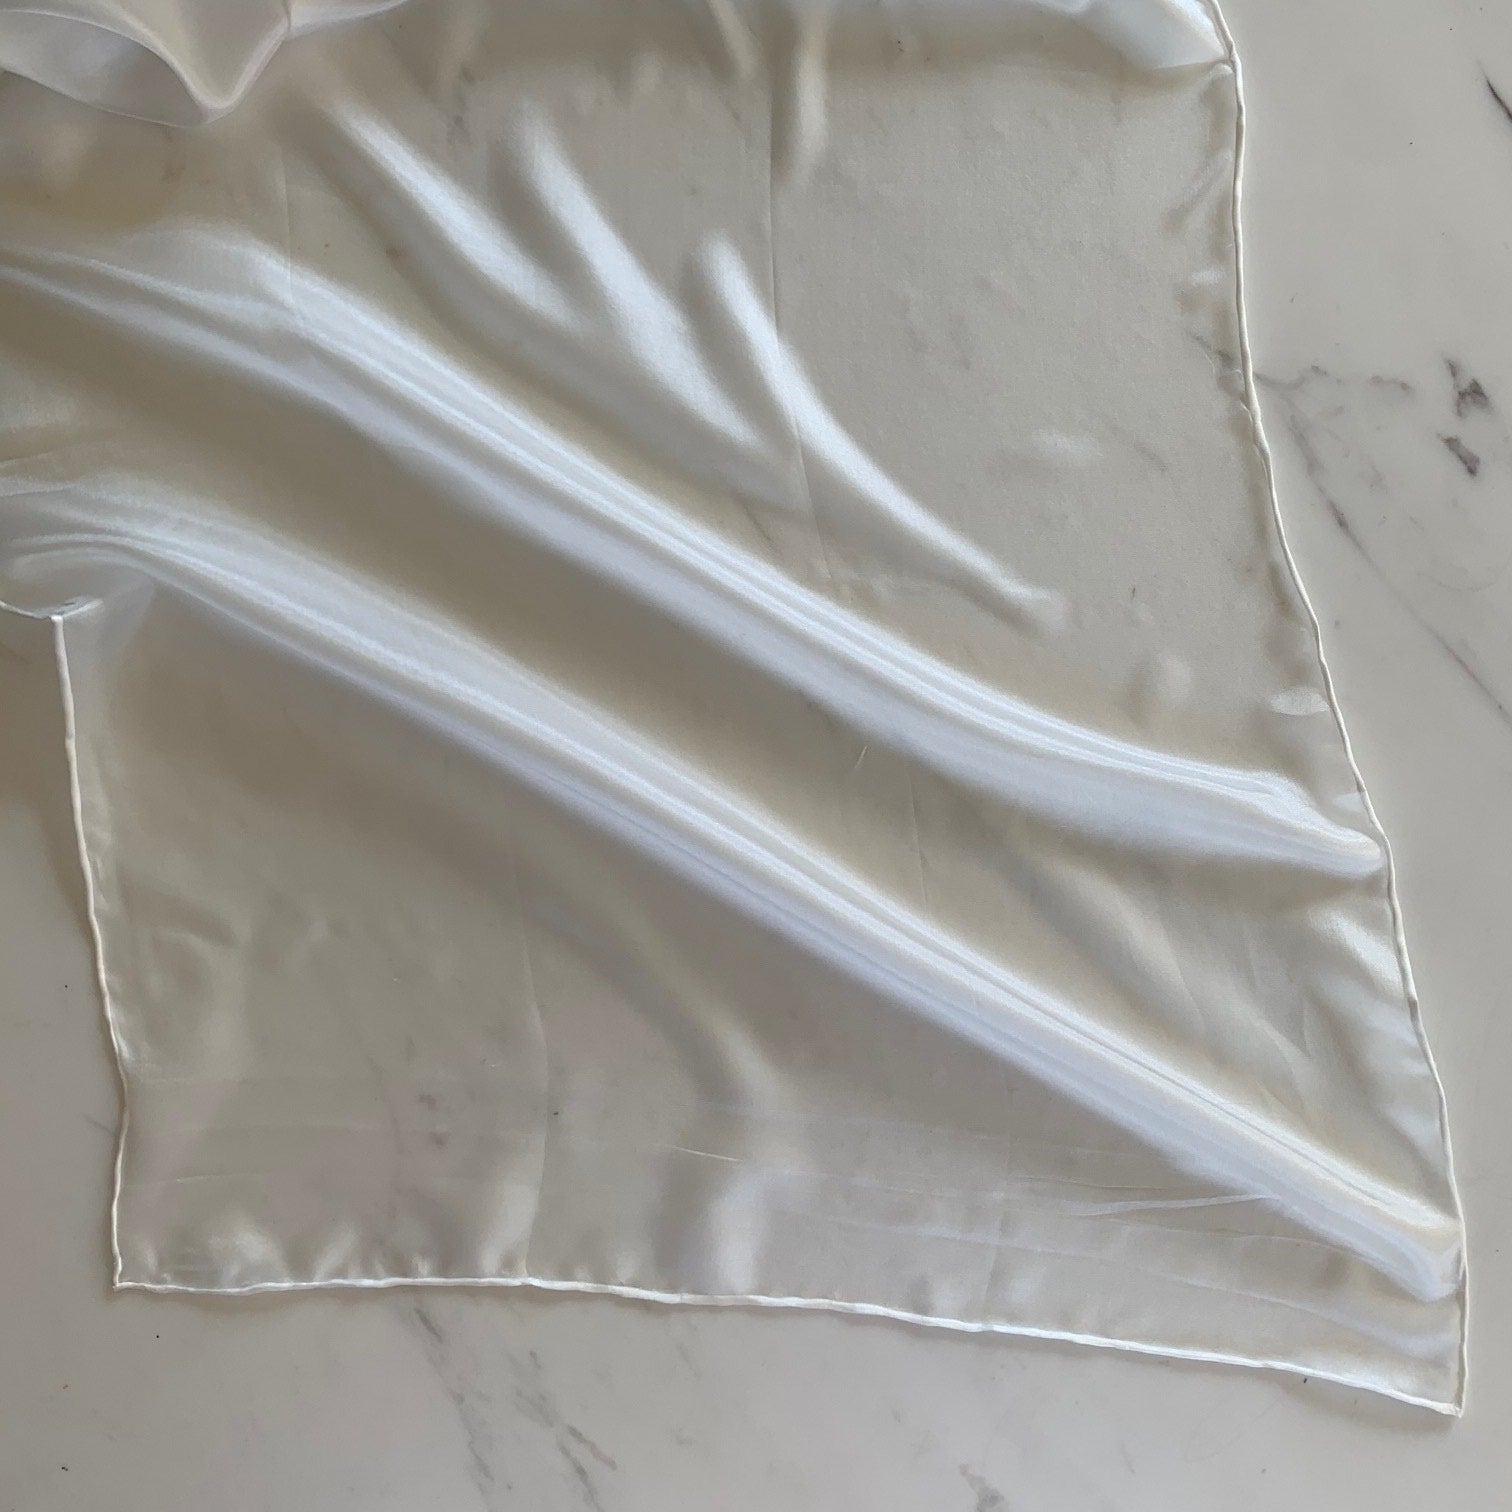 Presenting the JAP SILK scarf in natural color featuring a soft light weight pure silk scarf 28x160cm with fluid drape